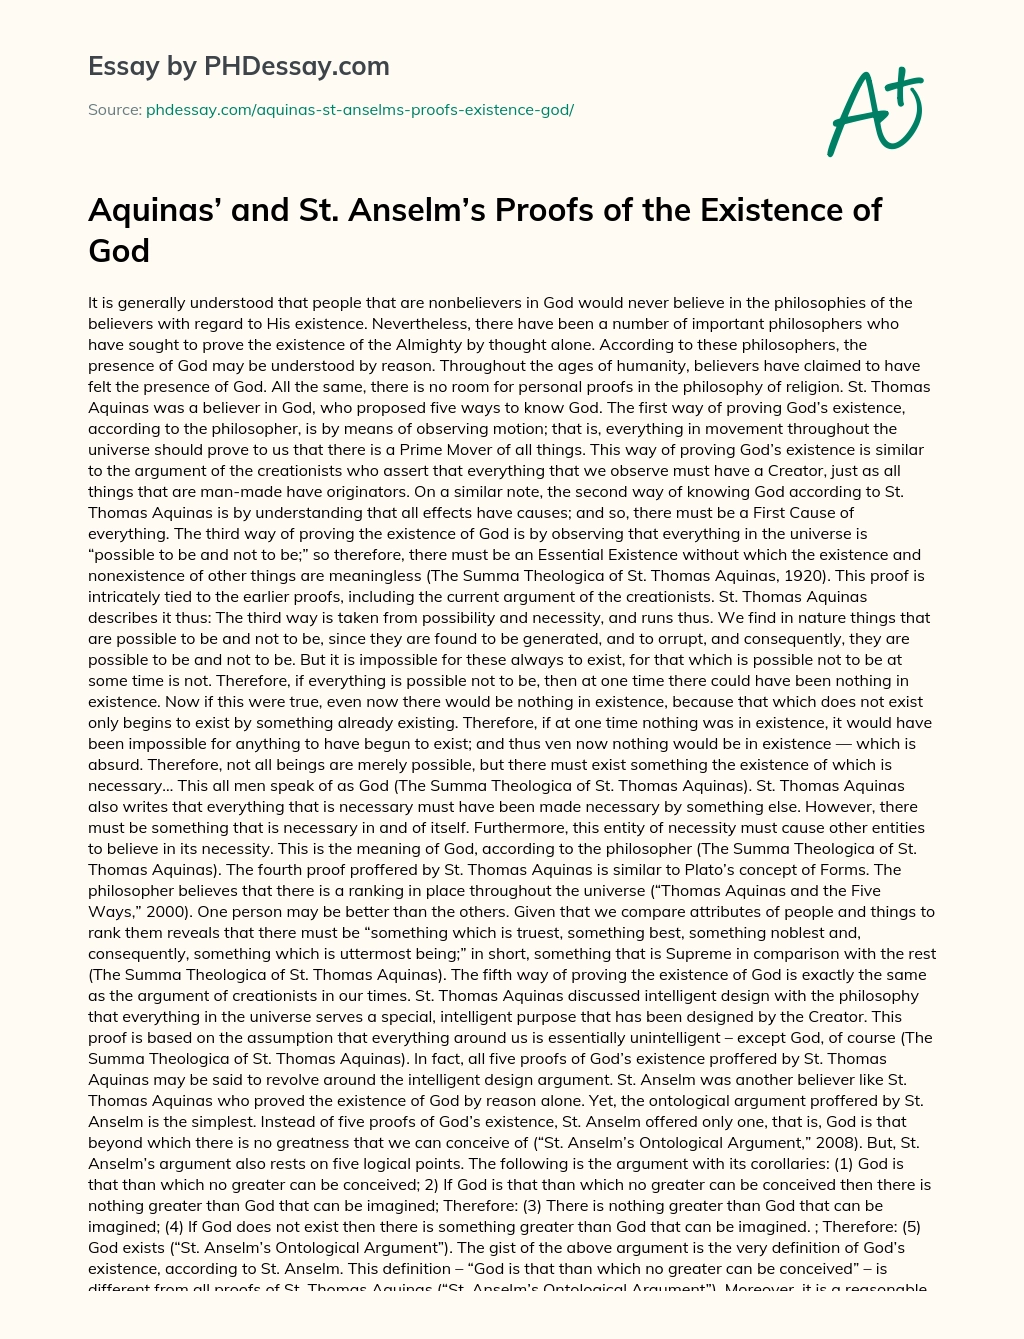 Aquinas’ and St. Anselm’s Proofs of the Existence of God essay